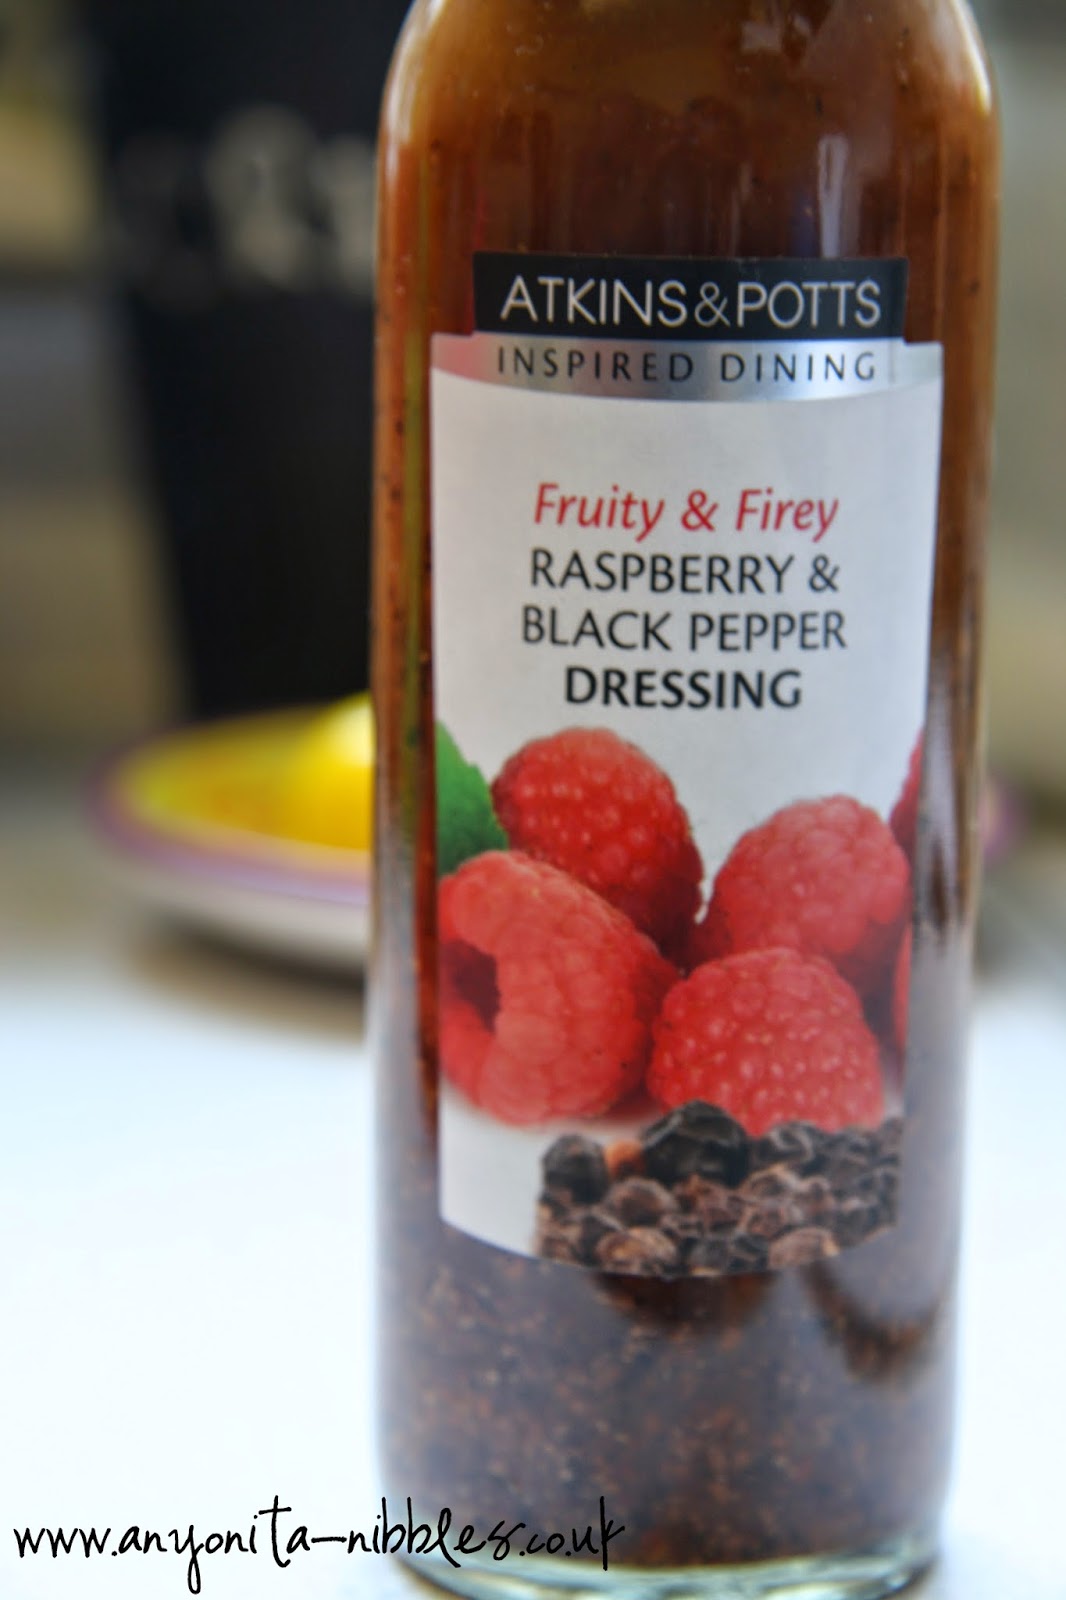 Atkins & Potts Fruity & Fiery Dressing from www.anyonita-nibbles.co.uk